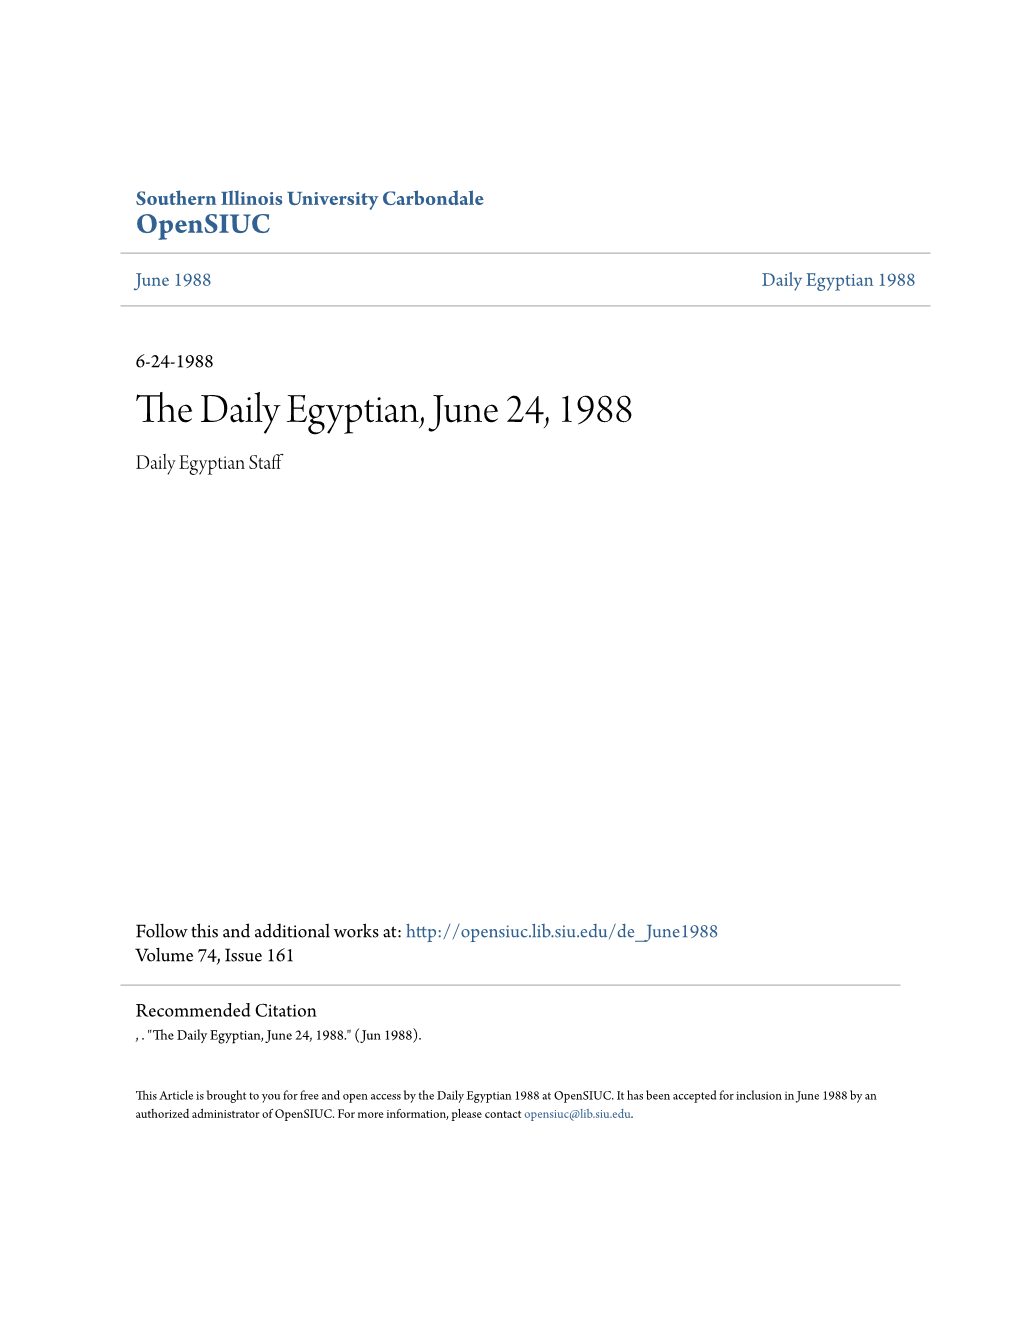 The Daily Egyptian, June 24, 1988